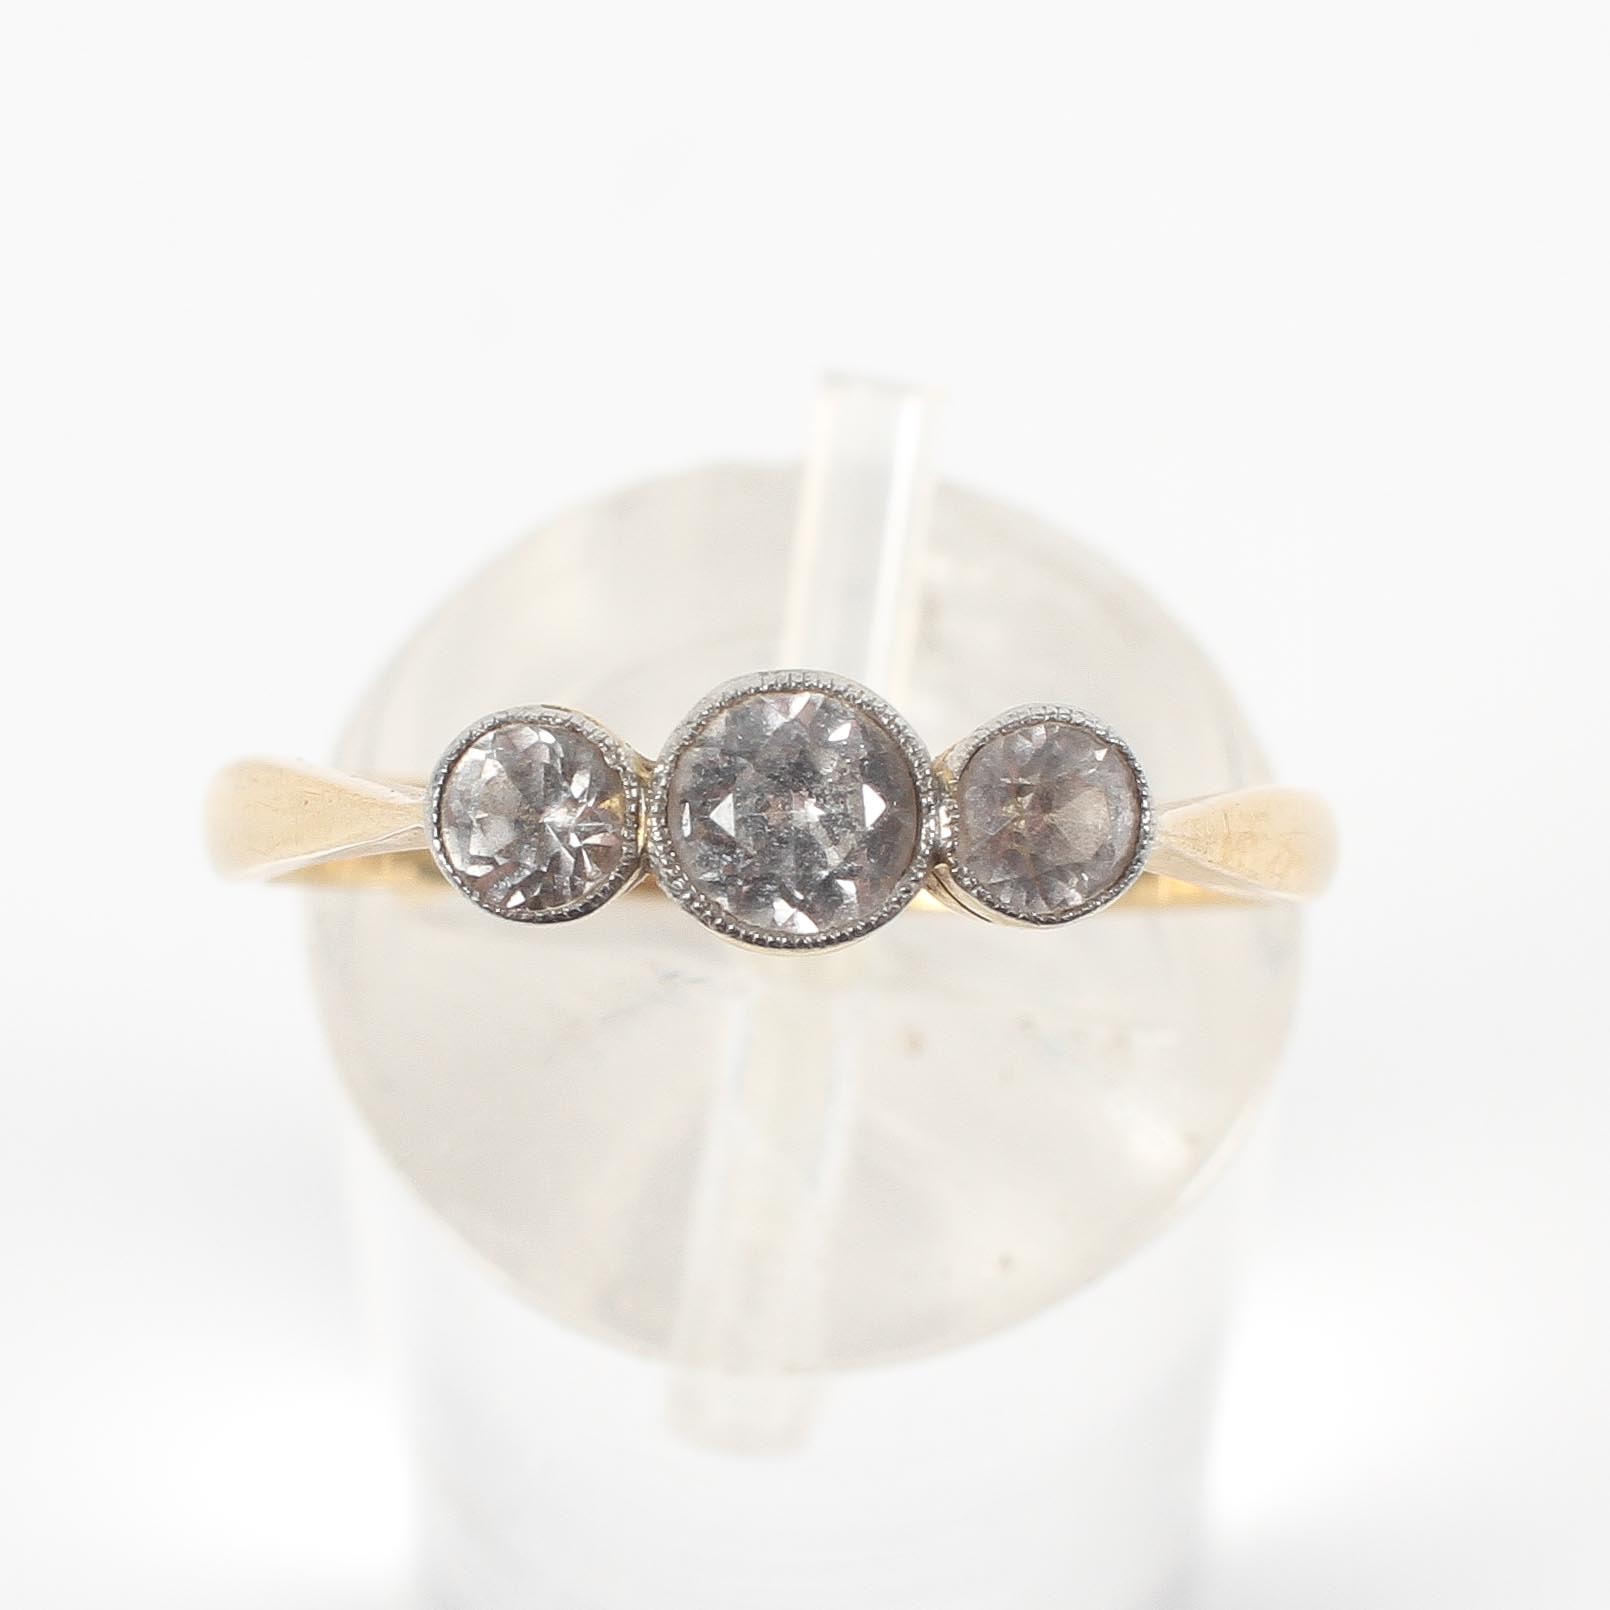 A yellow metal three stone ring set with three graduated round cut white stones; - Image 2 of 4